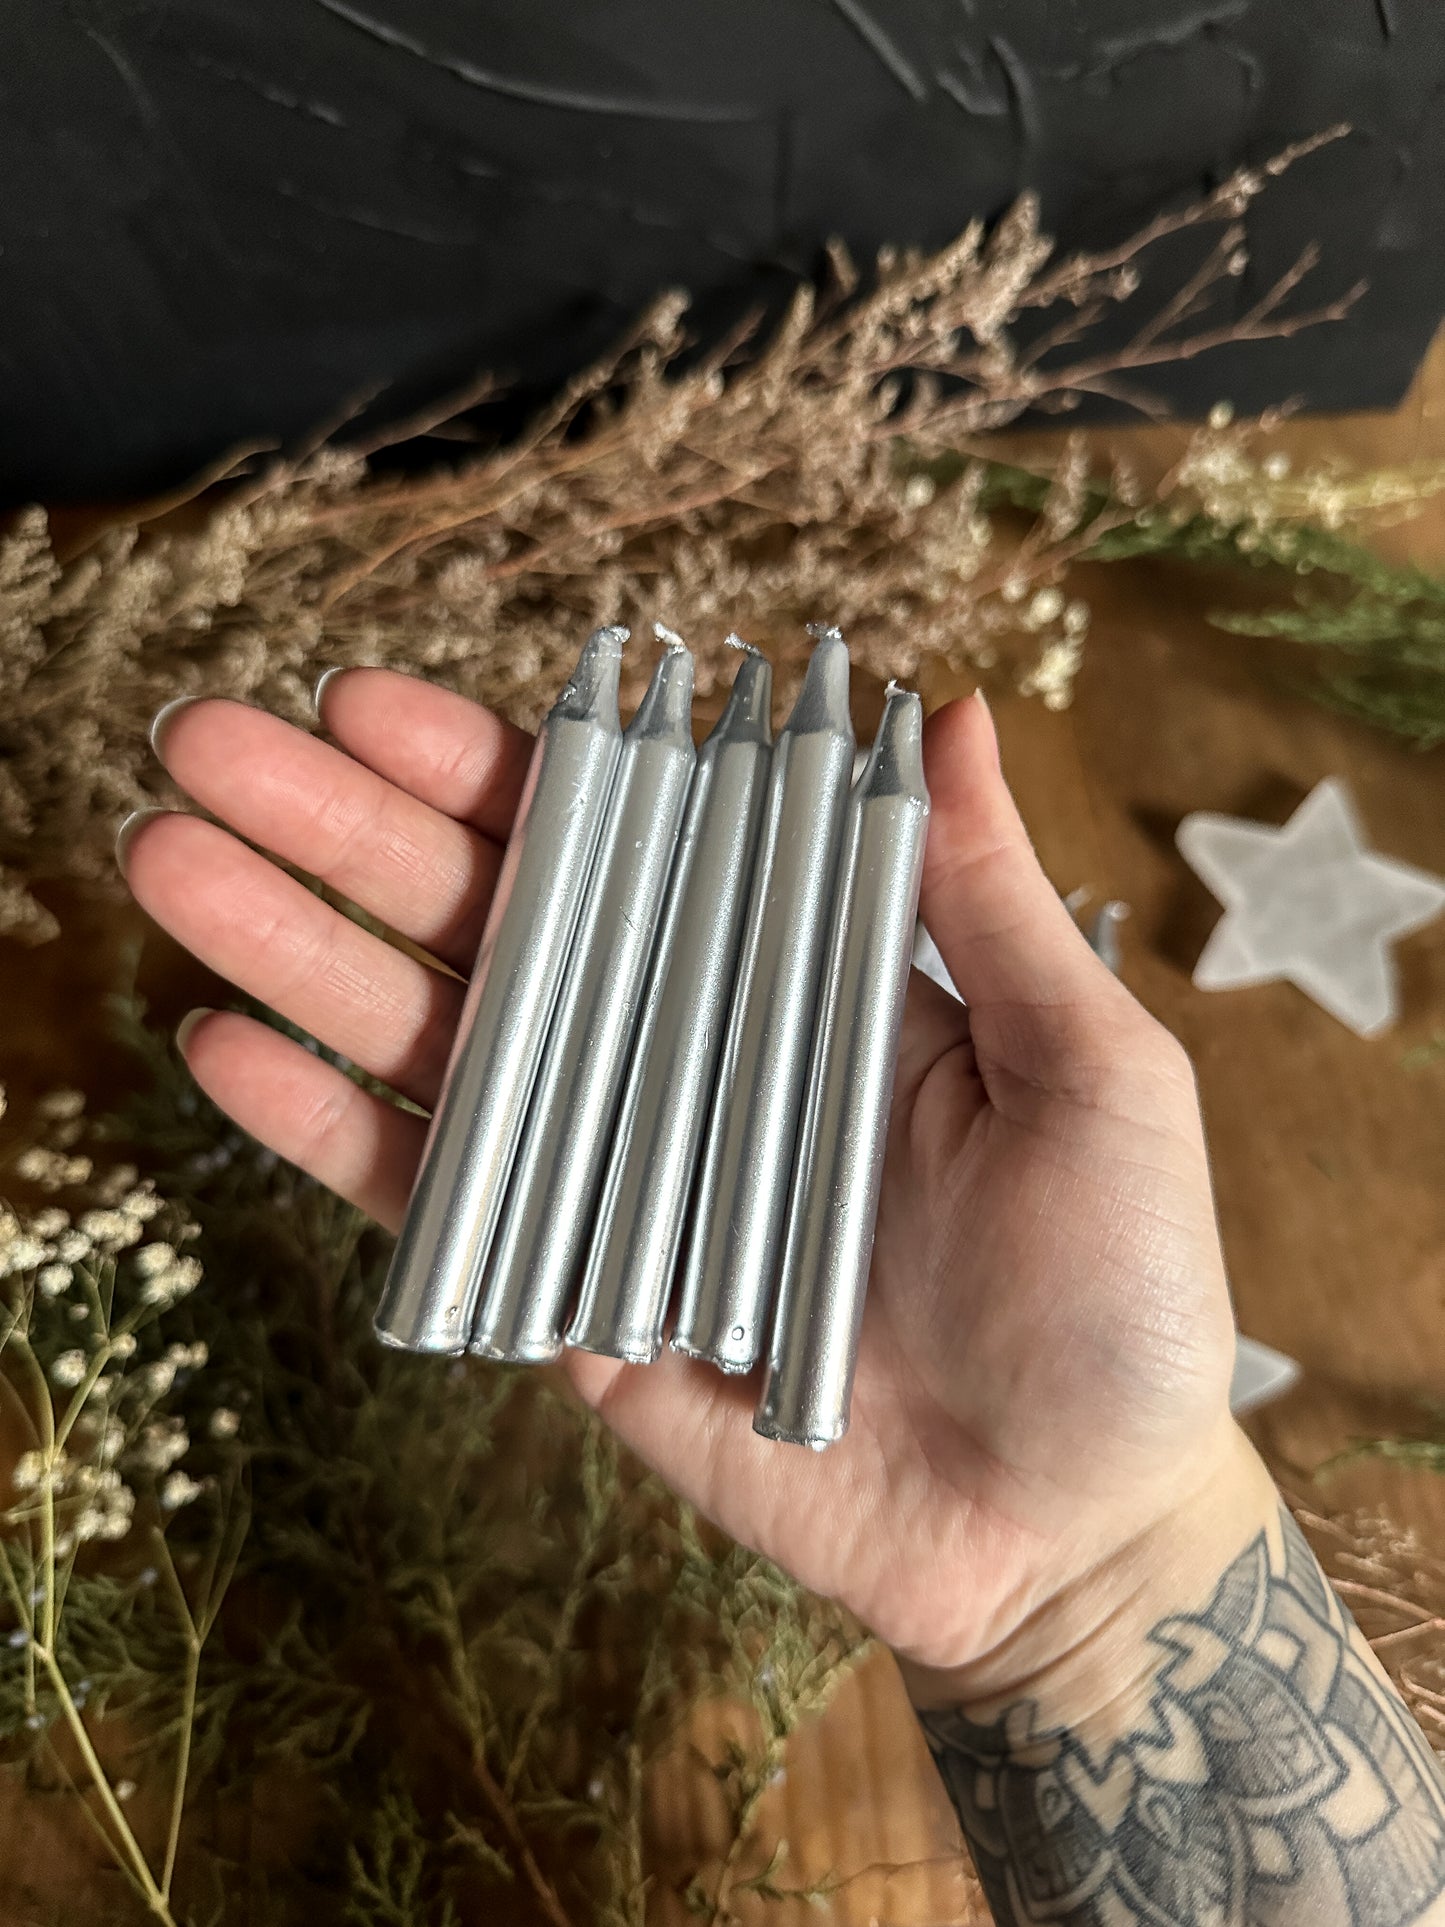 SILVER Spell Candles - 4" Chime Candles